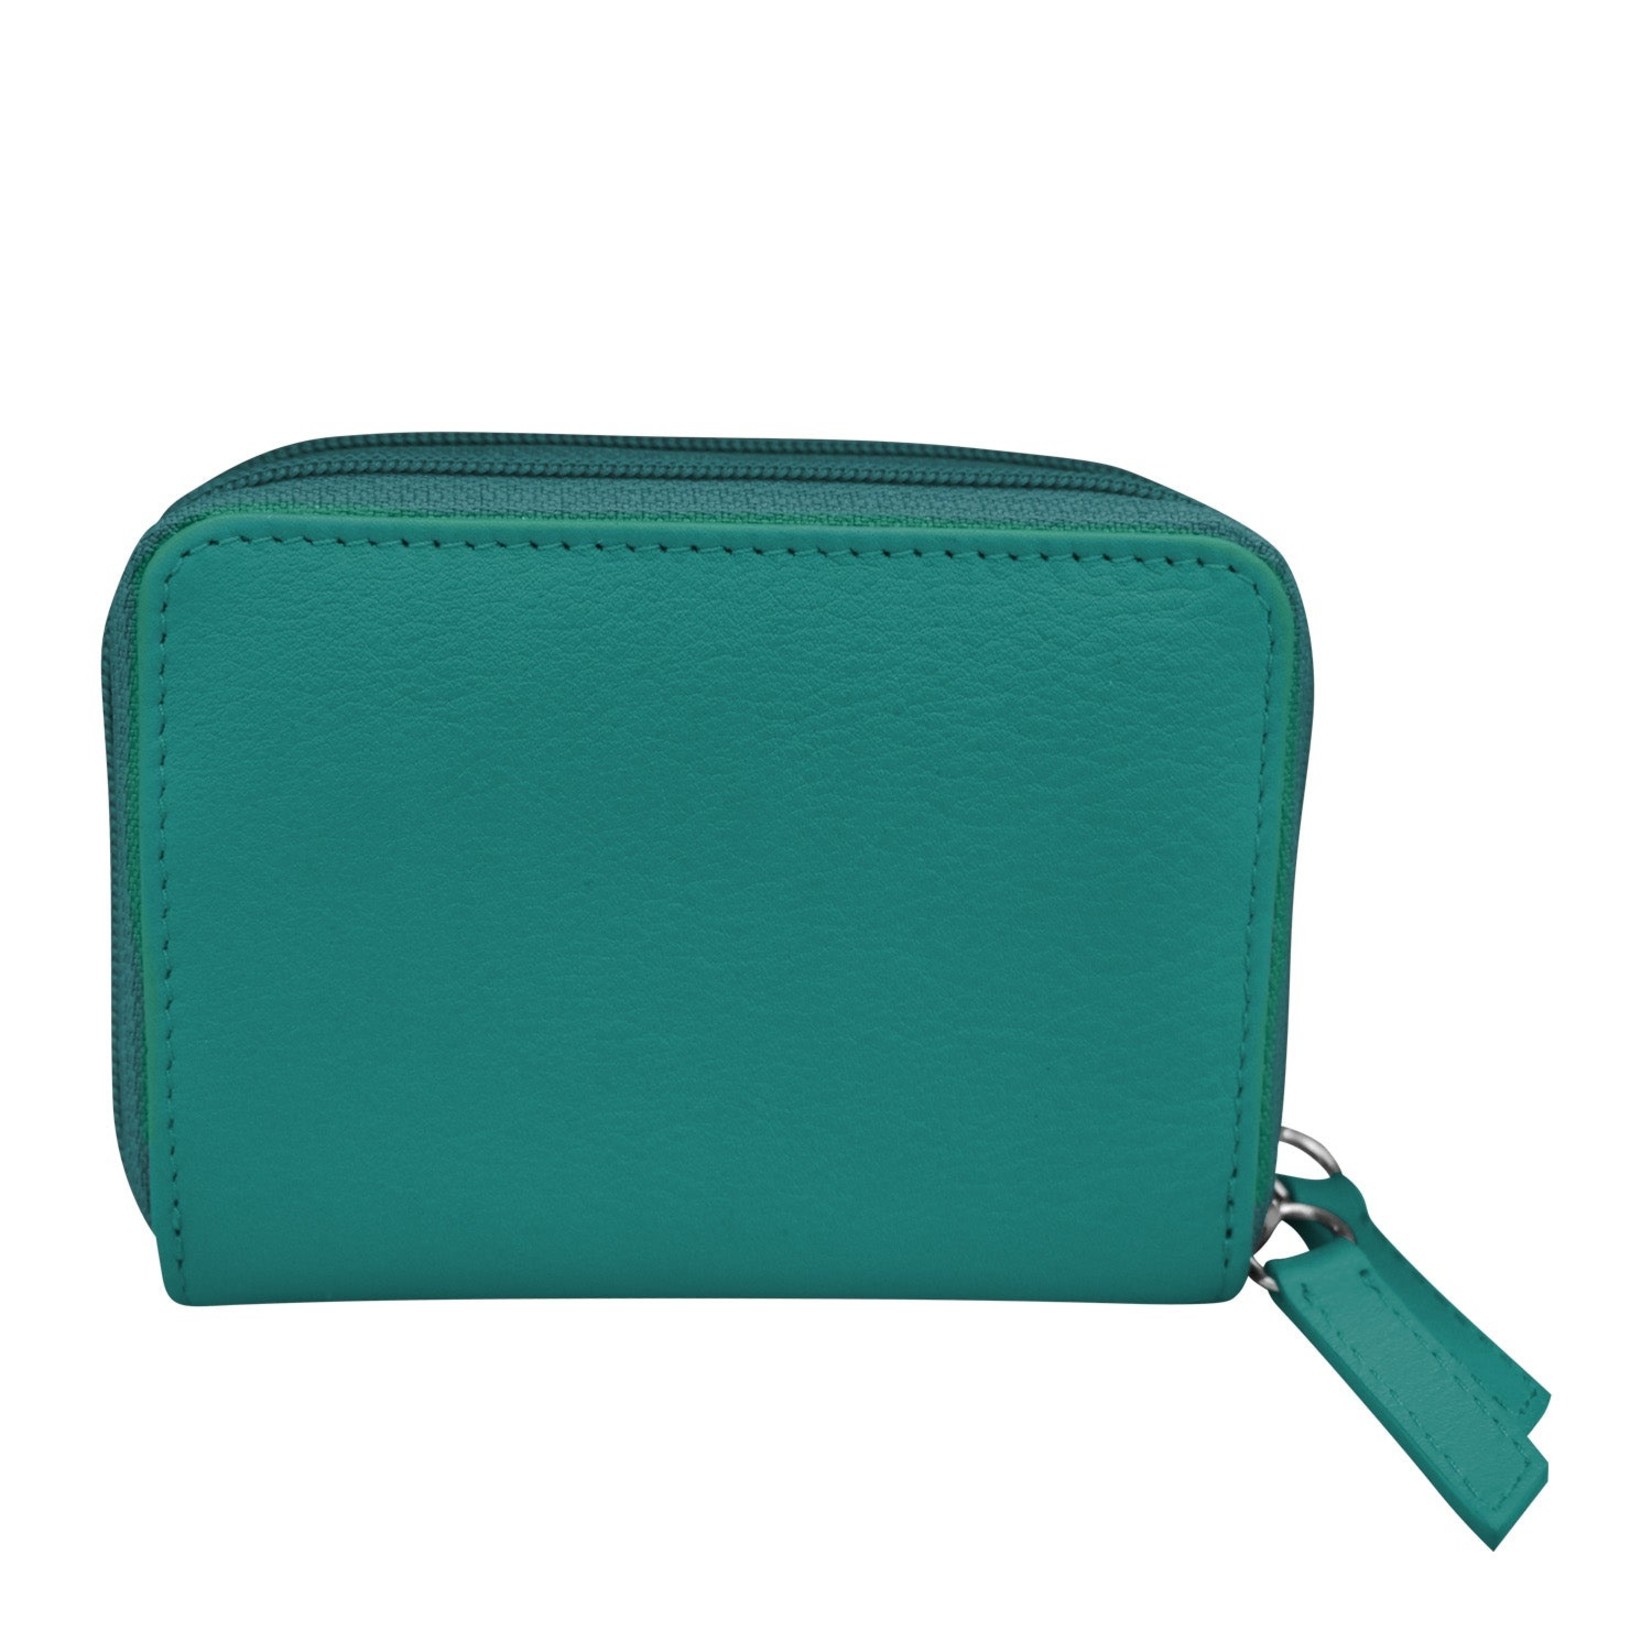 Leather Handbags and Accessories 6714 Aqua - RFID Double Zip Accordion Card Holder